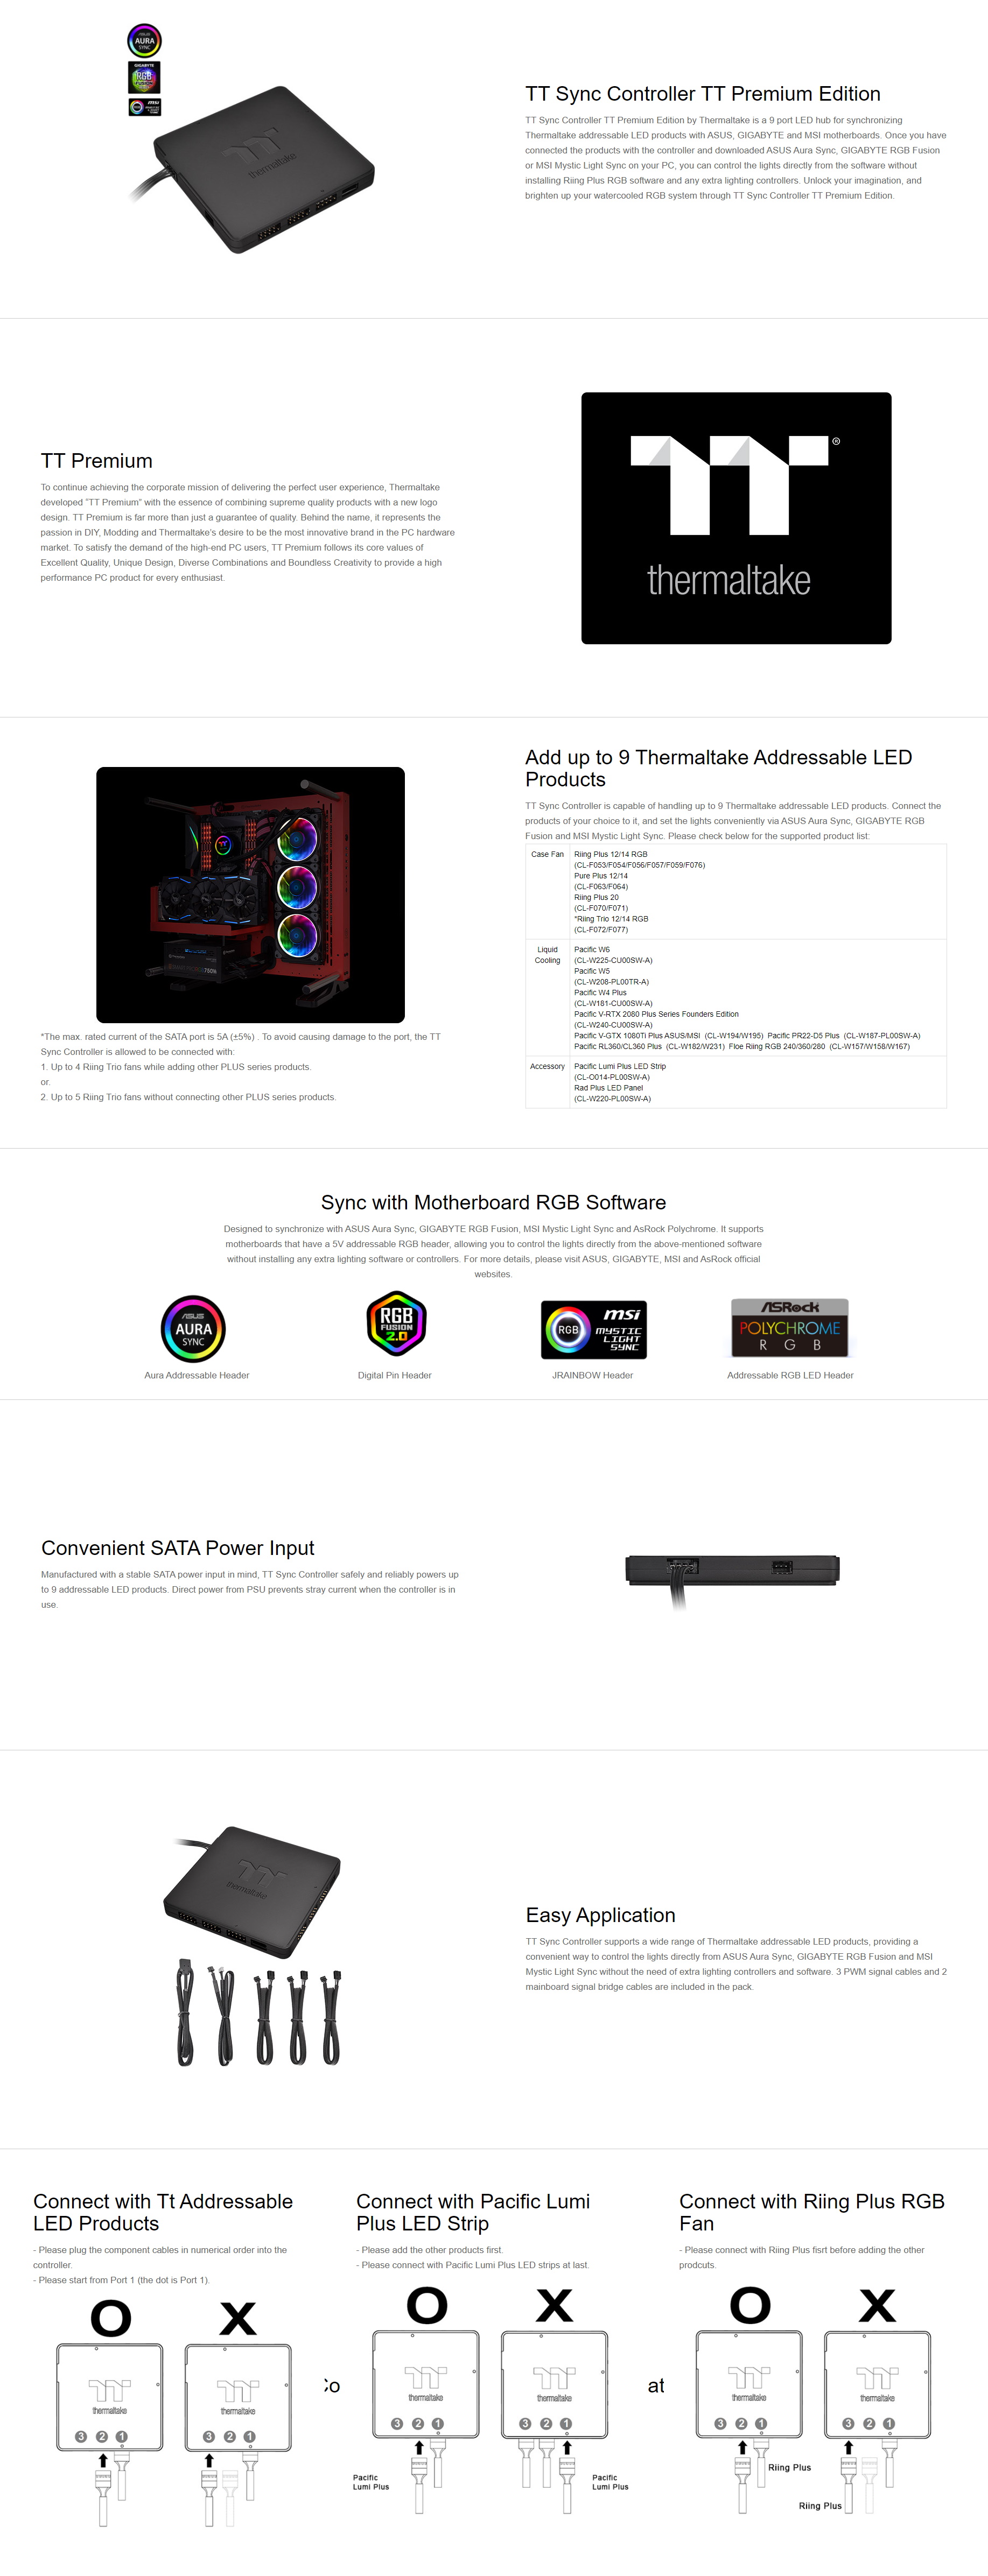 A large marketing image providing additional information about the product Thermaltake TT Sync Controller - Premium Edition - Additional alt info not provided